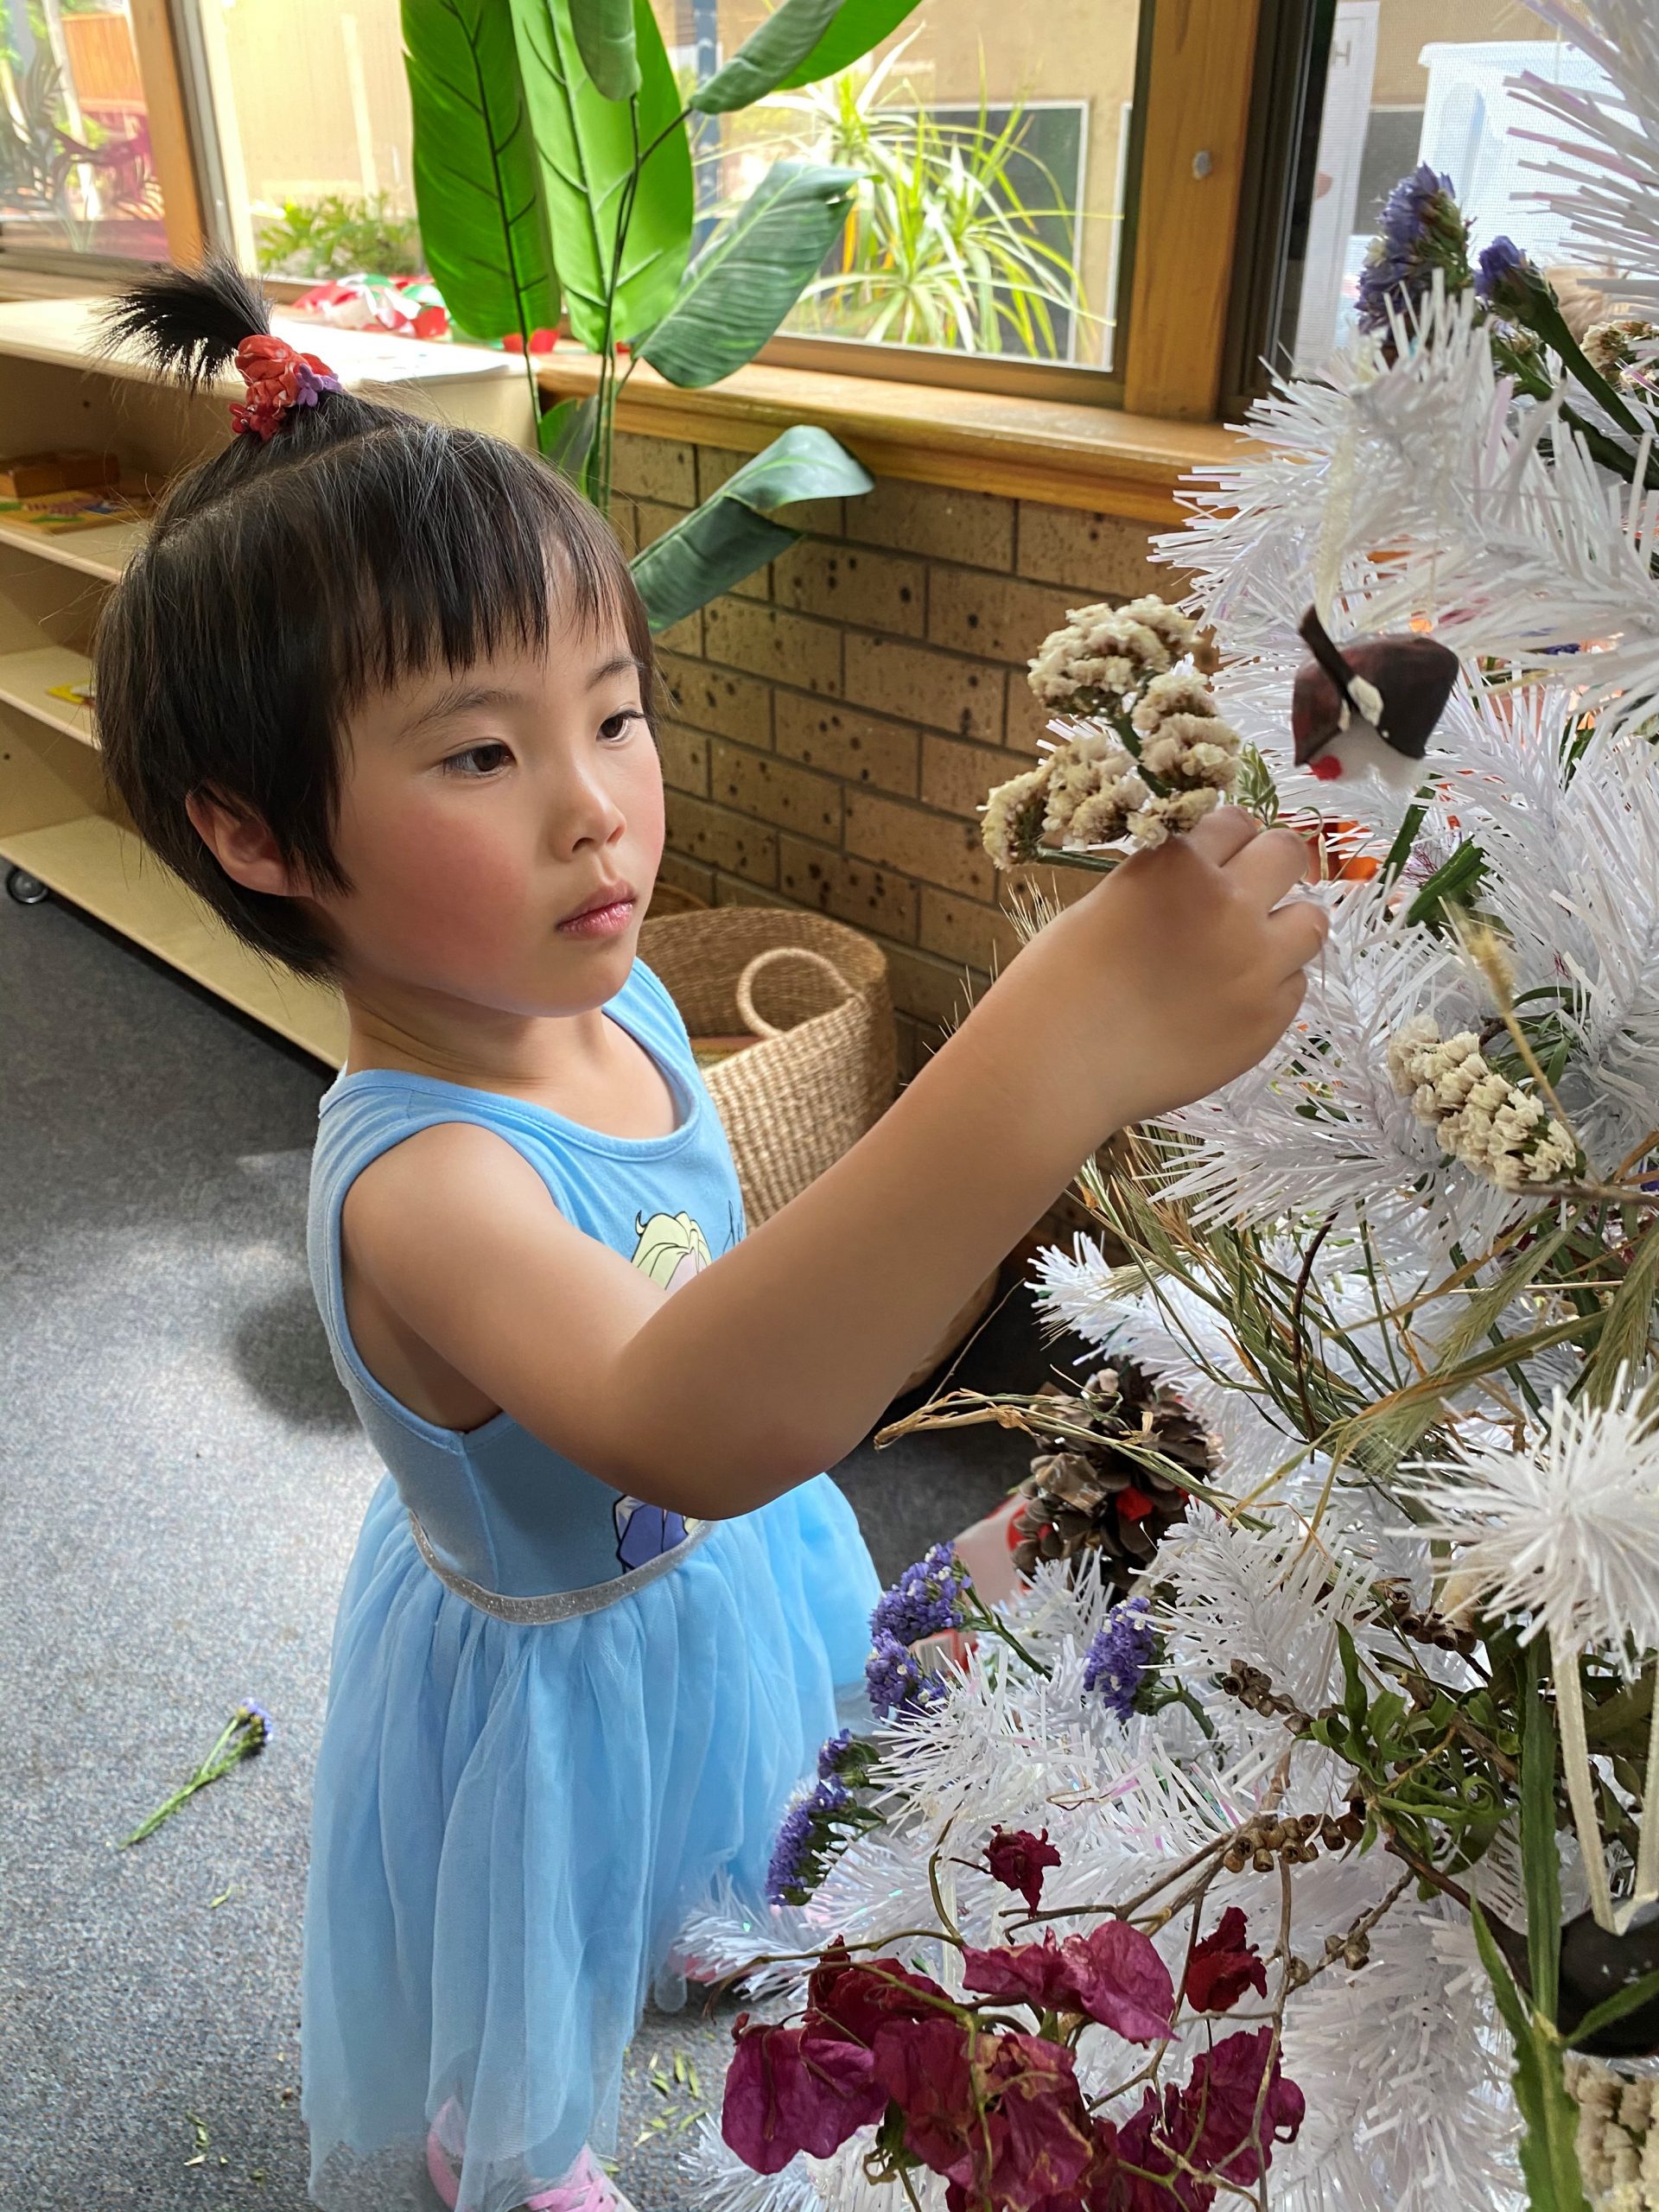 CHRISTMAS SPIRIT: Anne at Concordia Kindergarten reflects on the meaning of Christmas while decorating a tree as part of the ac.care Murraylands Communities for Children initiative.